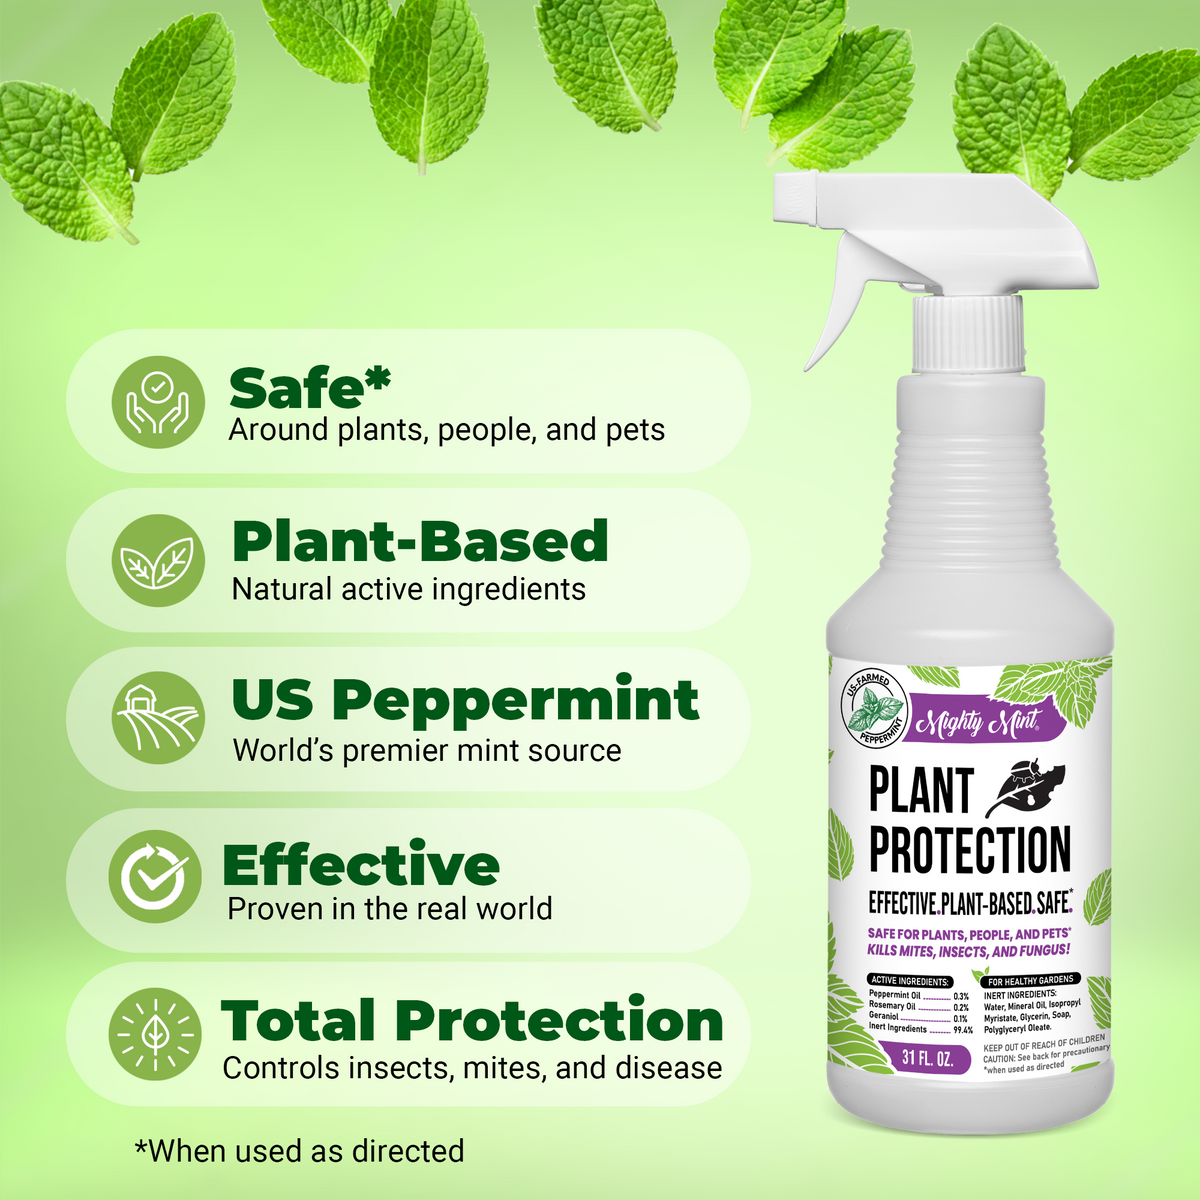 Mighty Mint 31oz Peppermint Plant Protection Spray - STANDALONE UNIT